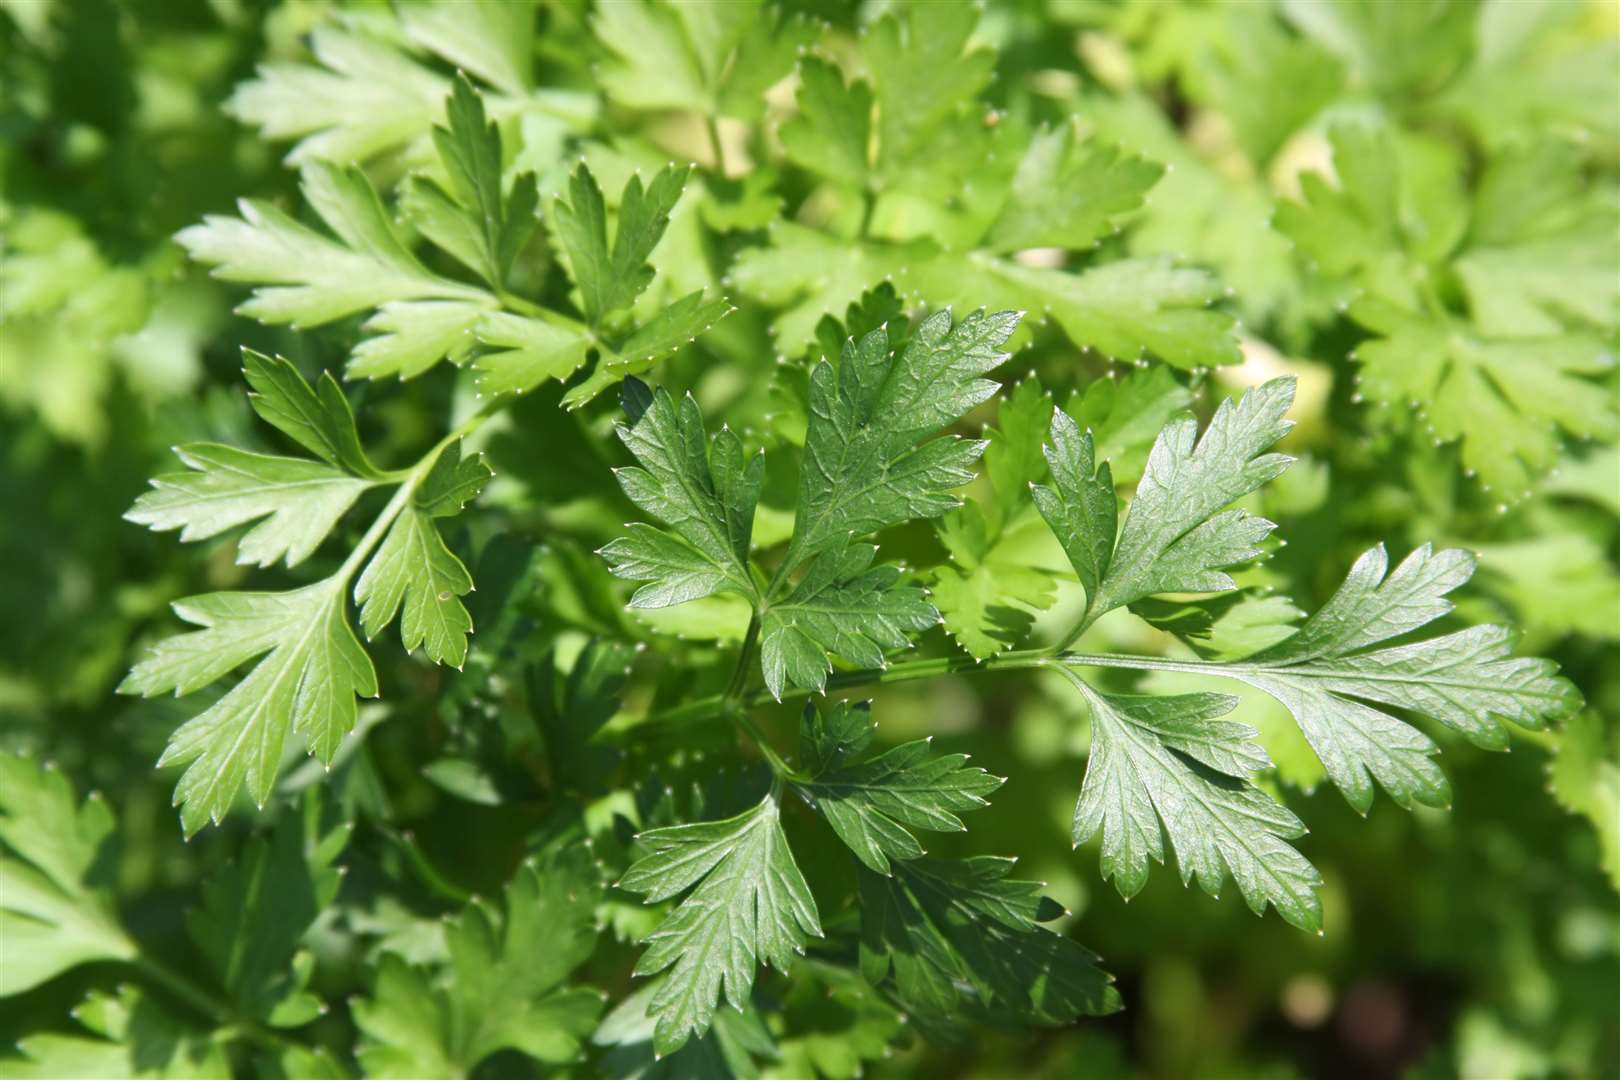 Undated Handout Photo of flat-leaved parsley. See PA Feature GARDENING Advice Herbs. Picture credit should read: iStock/PA. WARNING: This picture must only be used to accompany PA Feature GARDENING Advice Herbs.